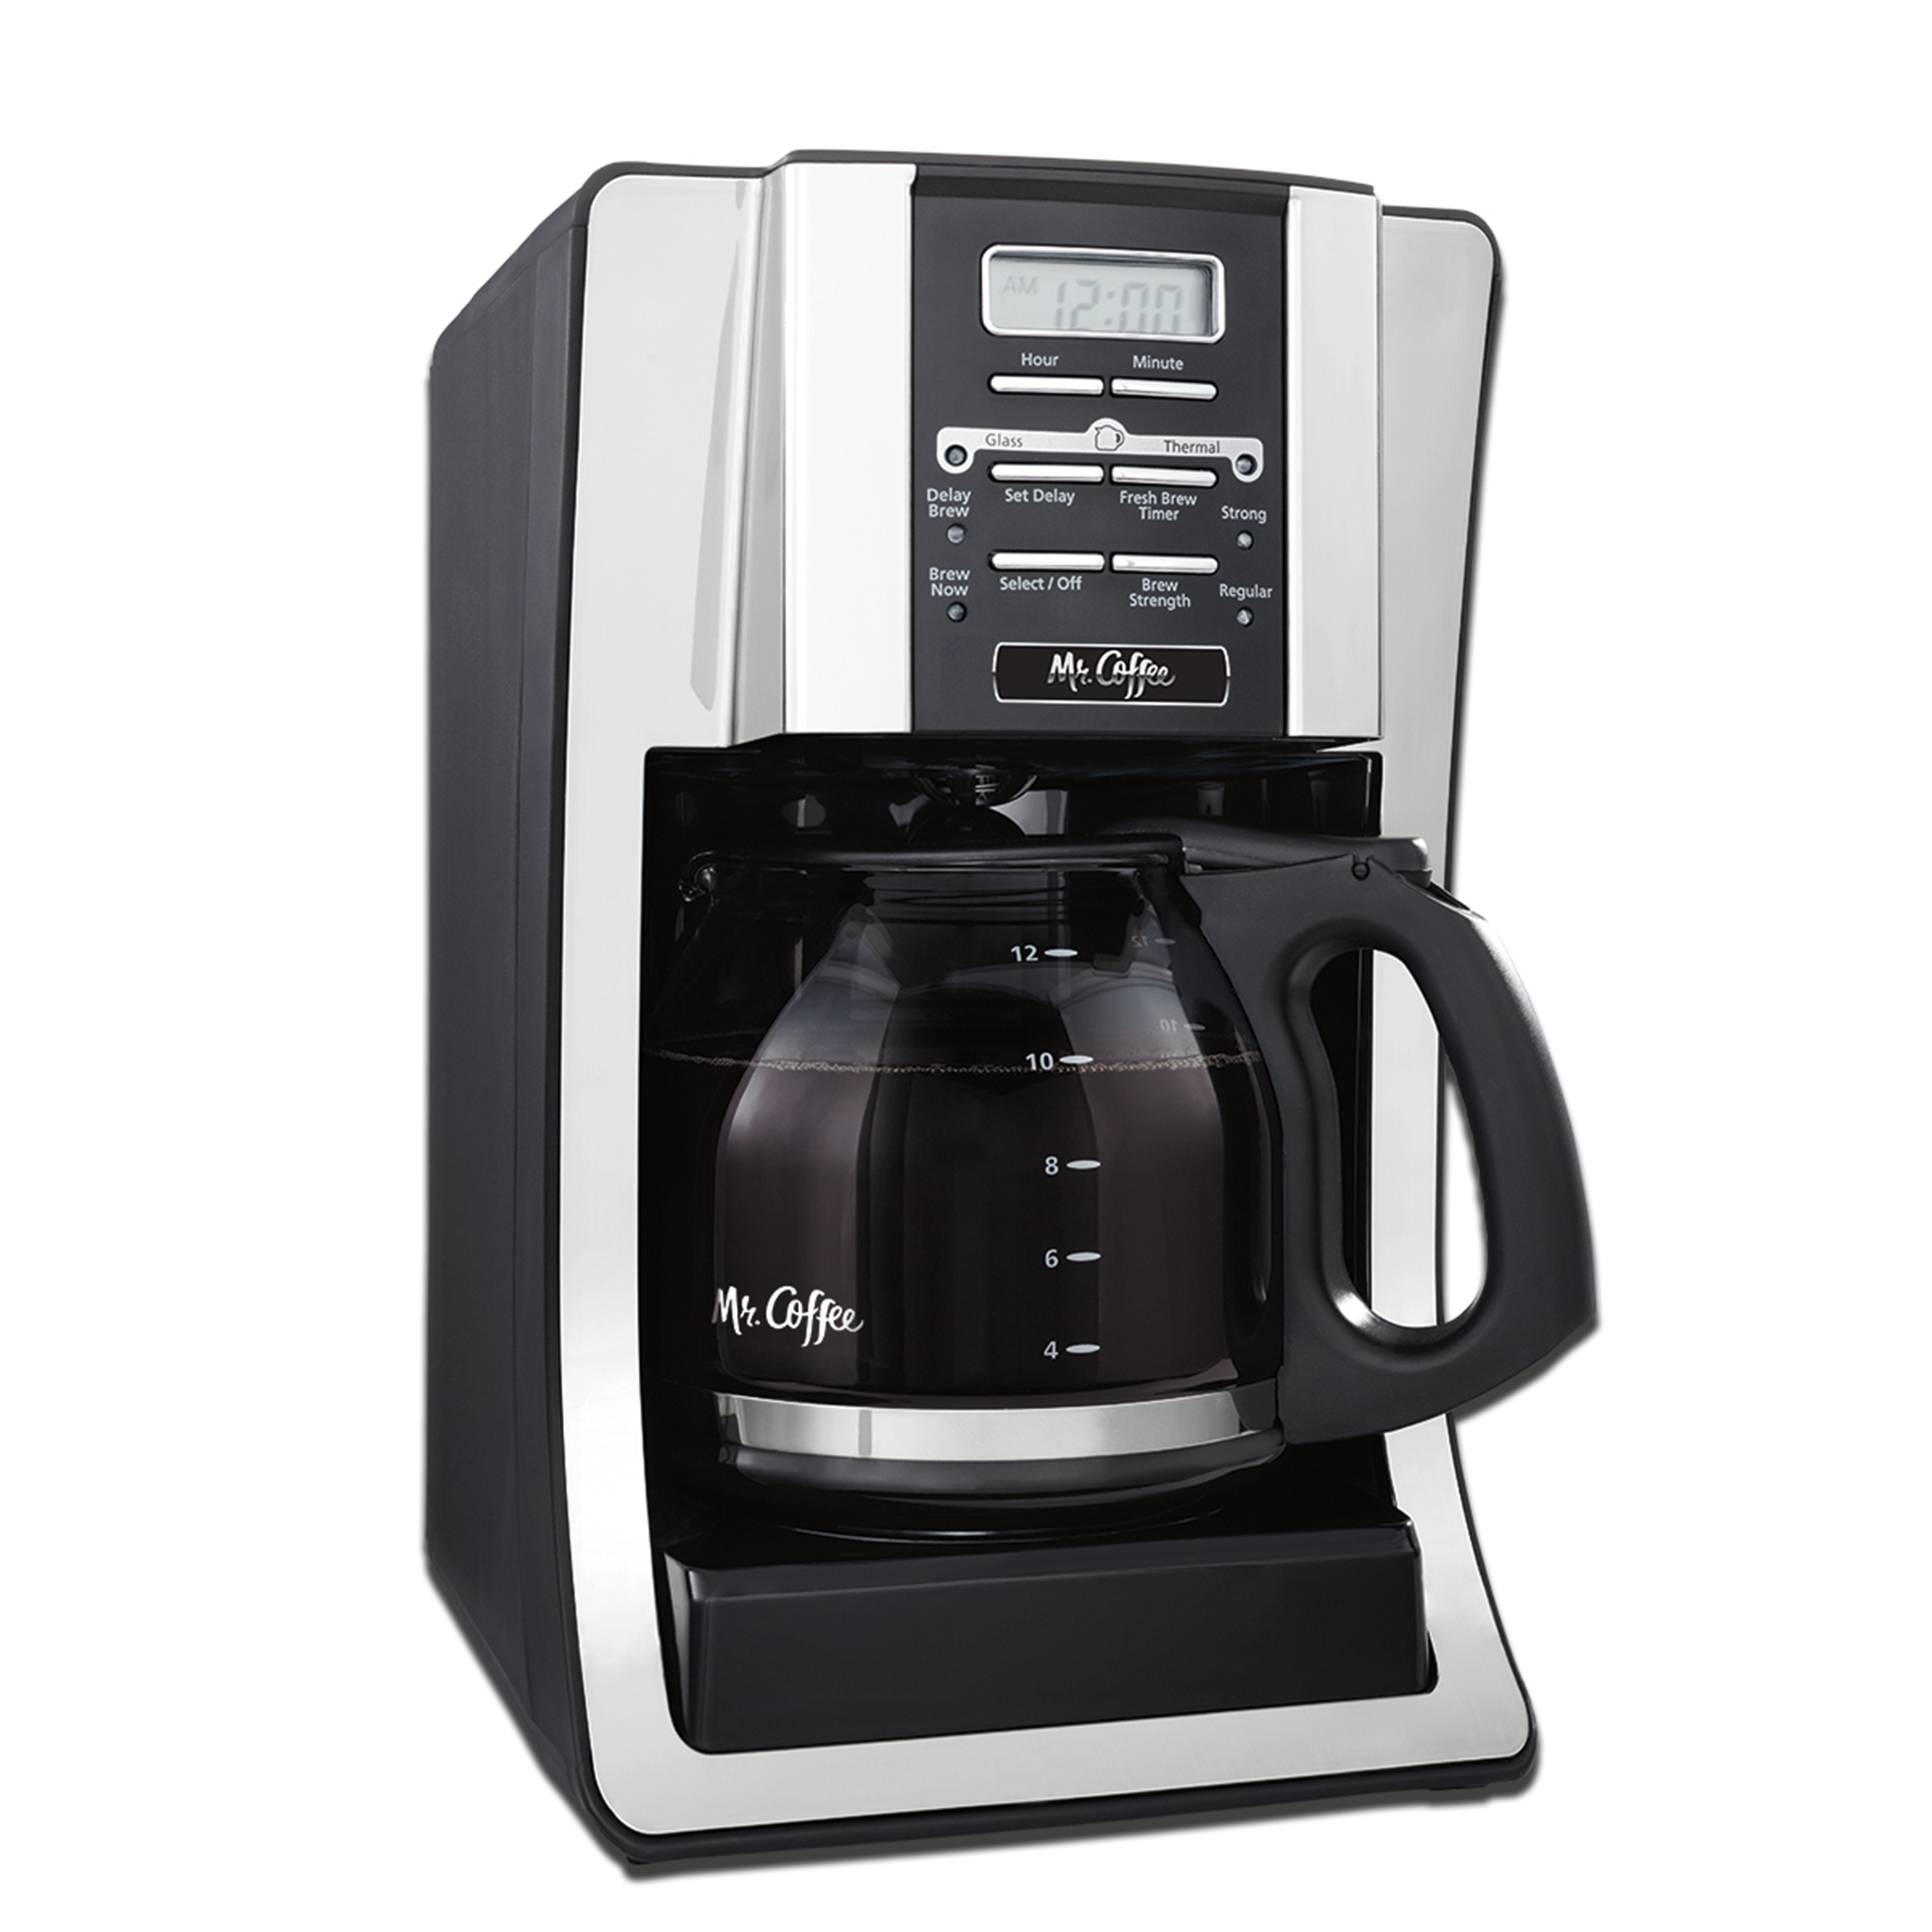 Mr. Coffee 12 Cup Programmable Black Coffee Maker - image 1 of 3